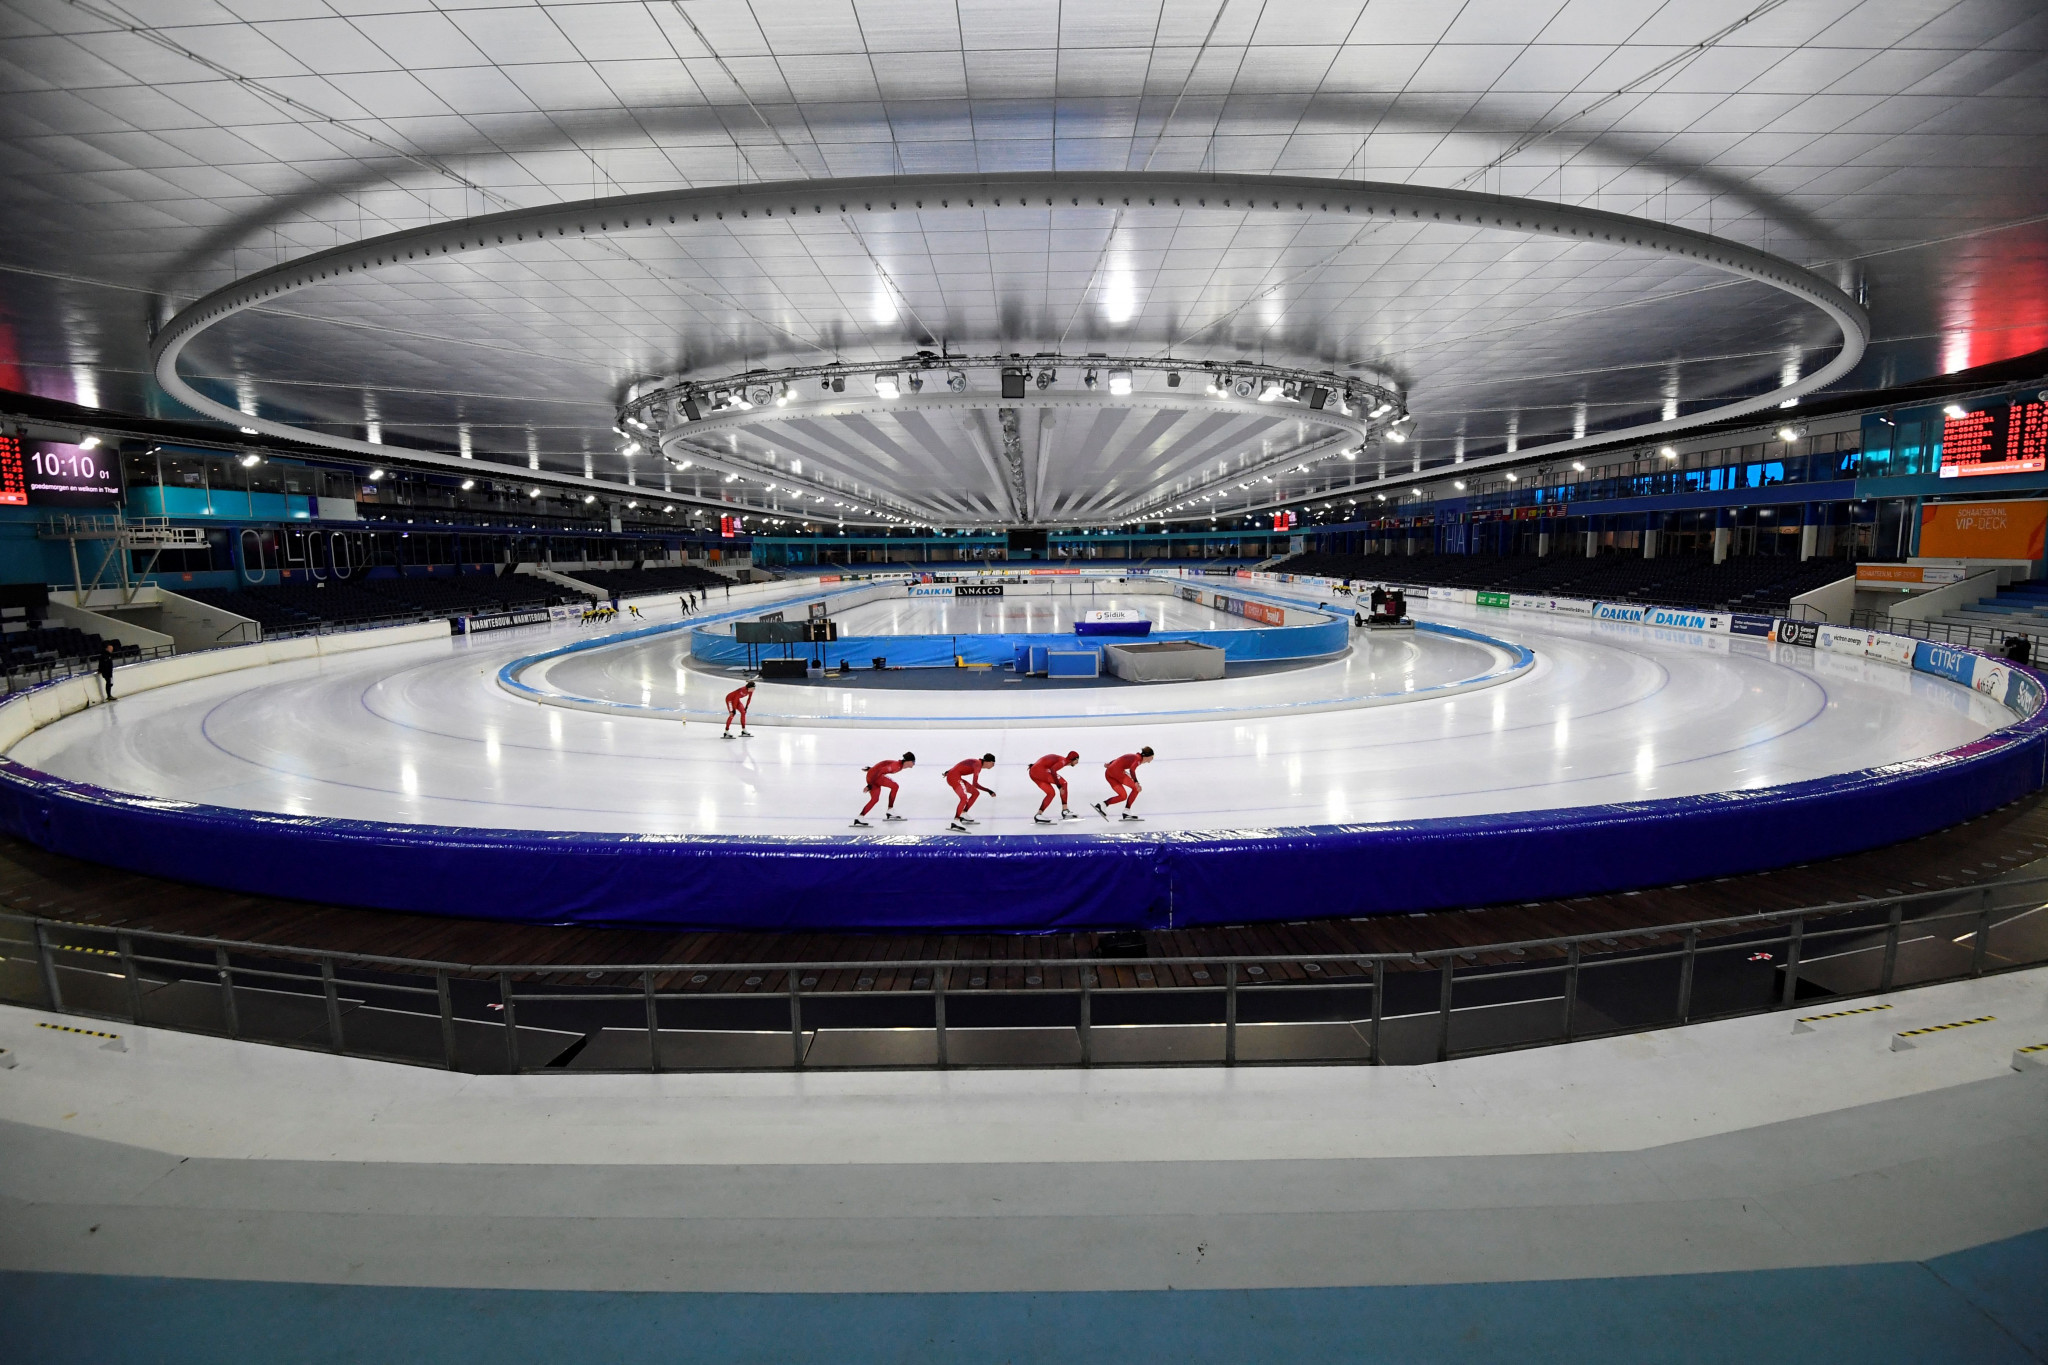 Full crowds are set to return to the Thialf Arena in Heerenveen for the first time since the start of the coronavirus pandemic at the ISU Speed Skating World Cup Final this weekend ©Getty Images